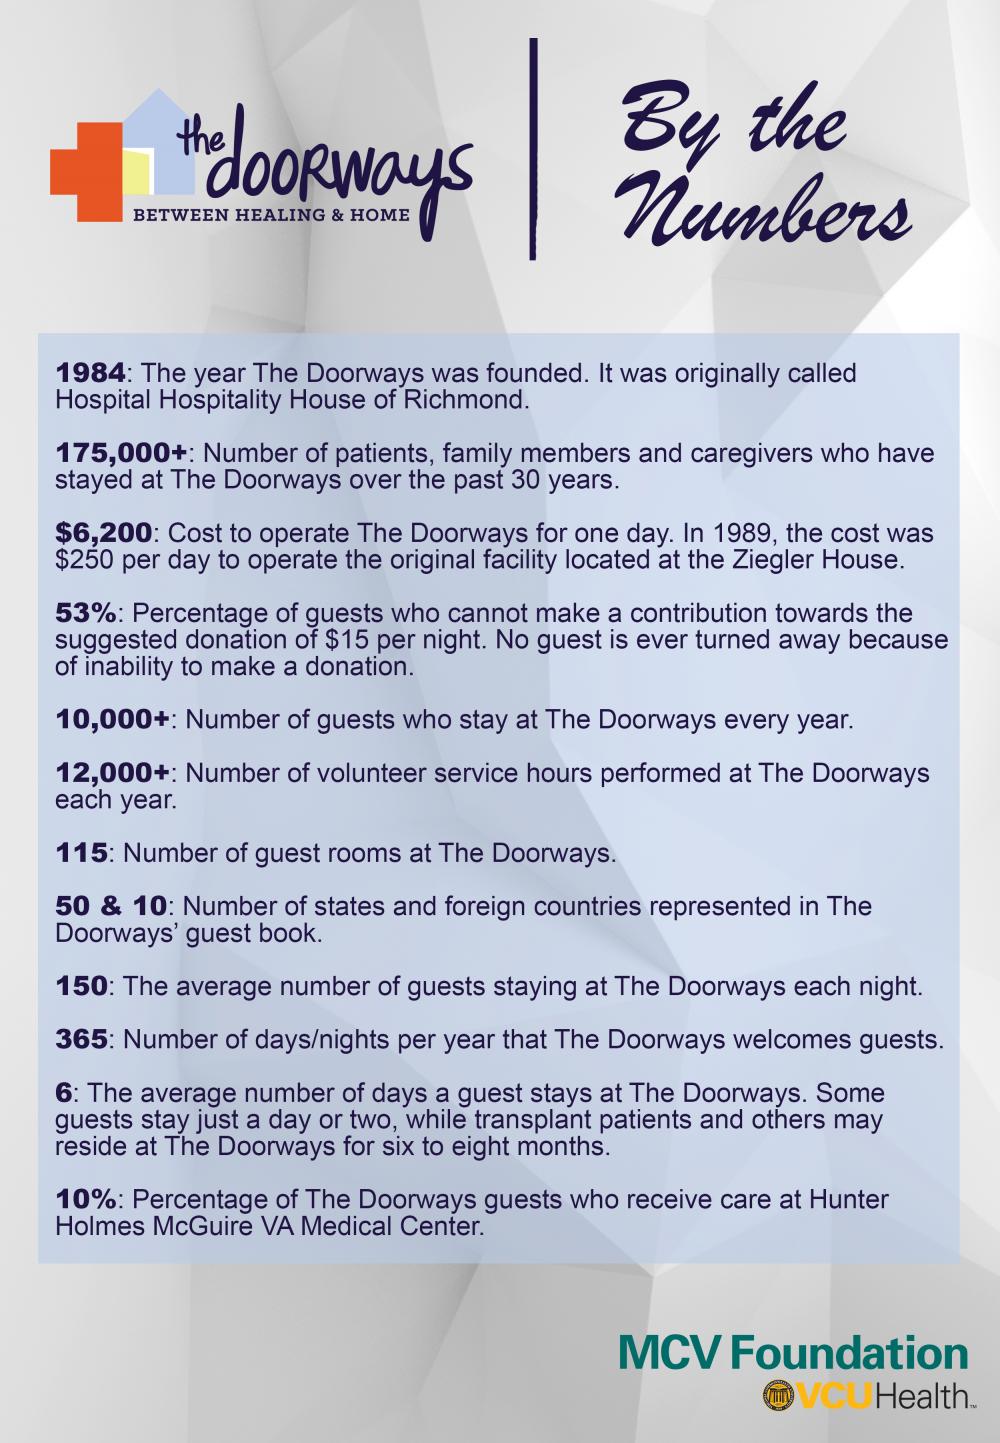 The Doorways by the Numbers